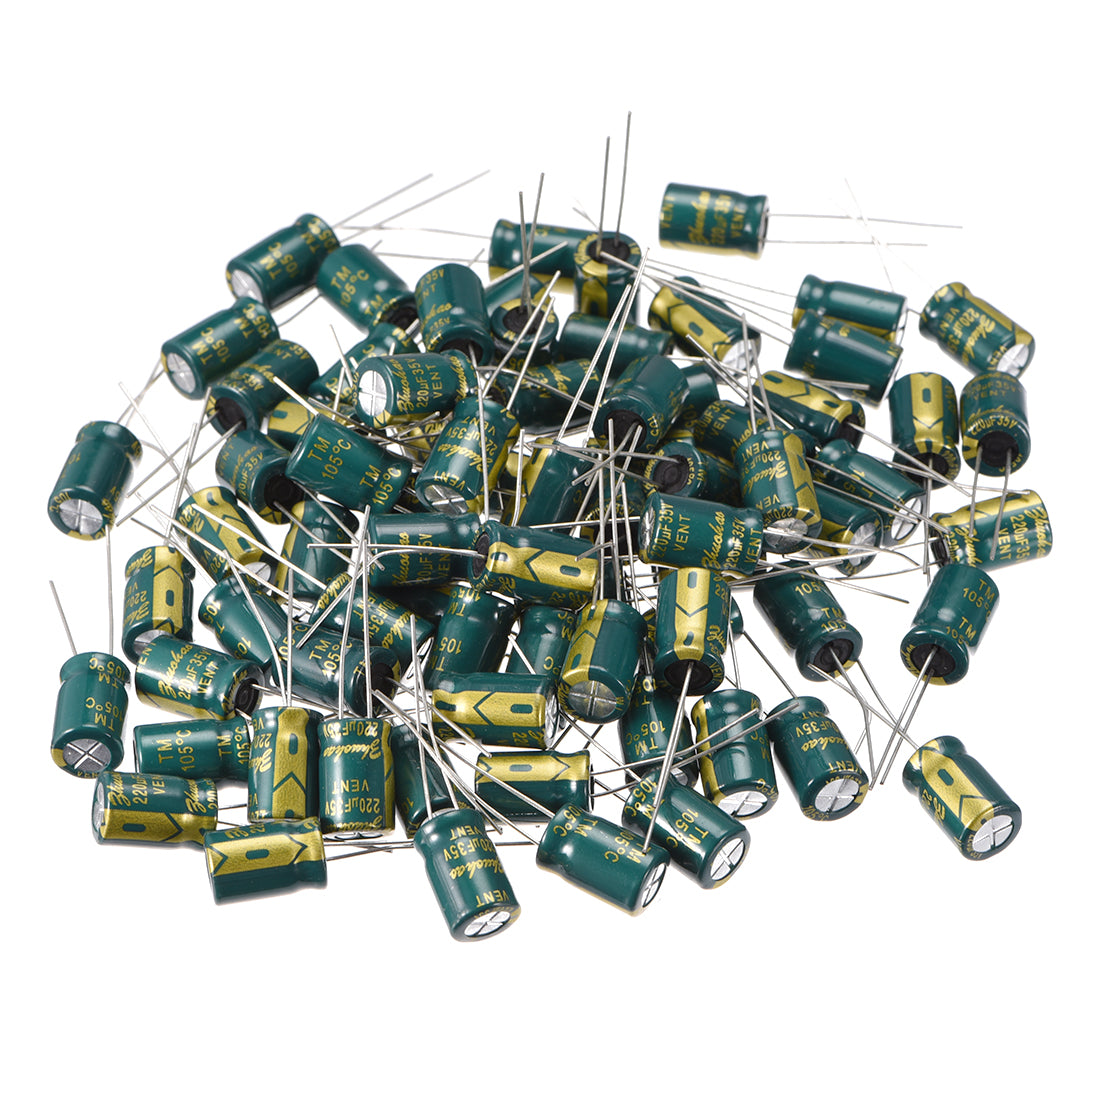 uxcell Uxcell Aluminum Radial Electrolytic Capacitor Low ESR Green with 220UF 35V 105 Celsius Life 3000H 8 x 12 mm High Ripple Current,Low Impedance 80pcs